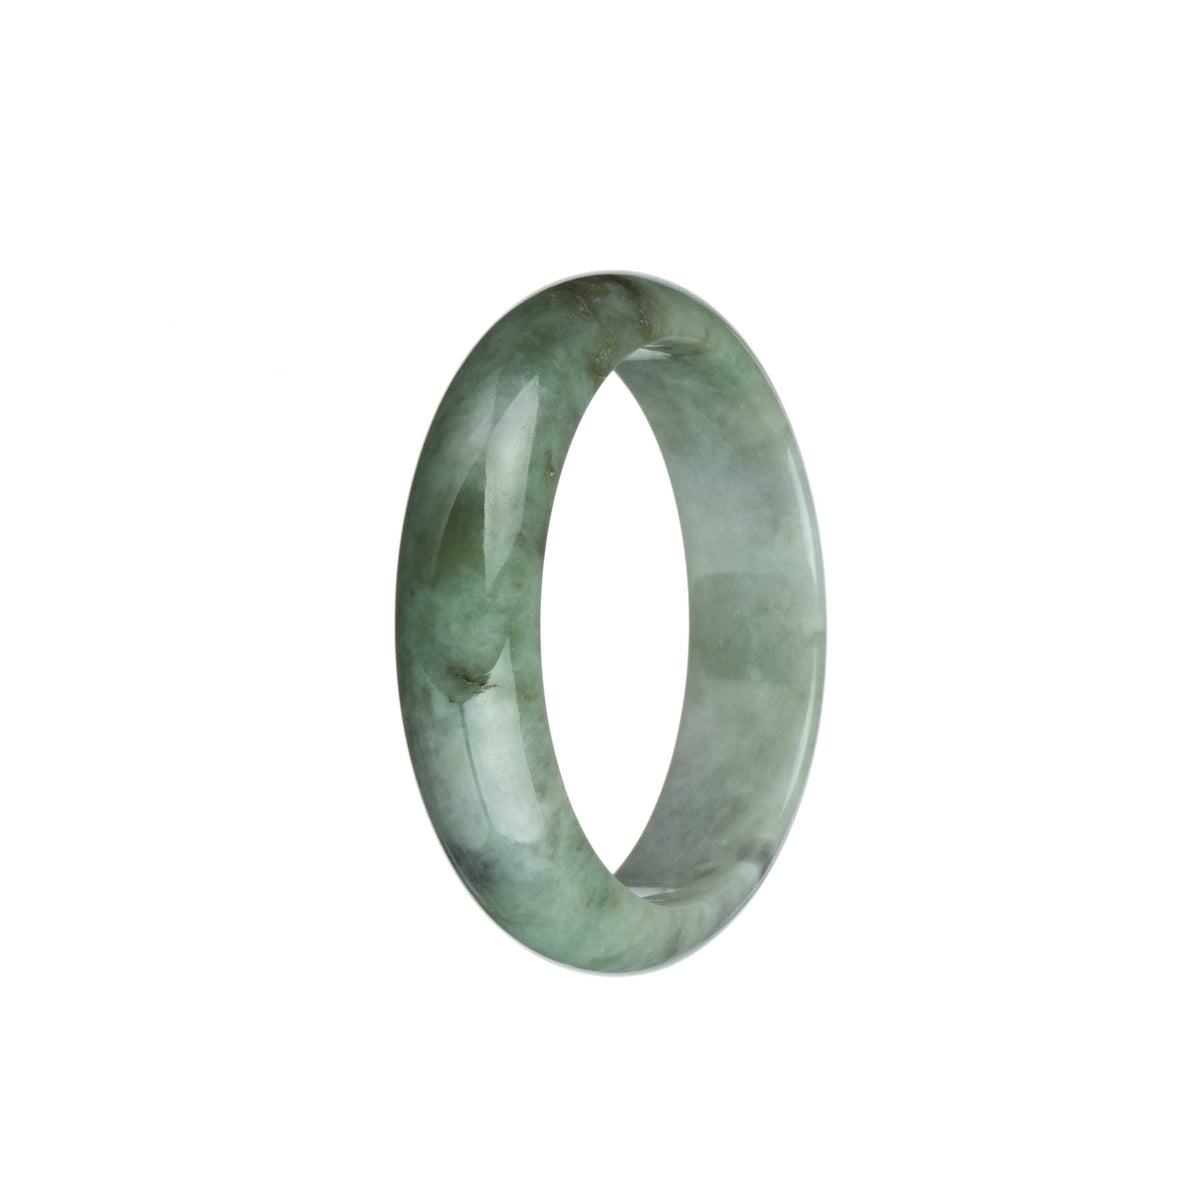 Genuine Type A Green and Light Grey with Brown Patch Traditional Jade Bangle - 53mm Half Moon